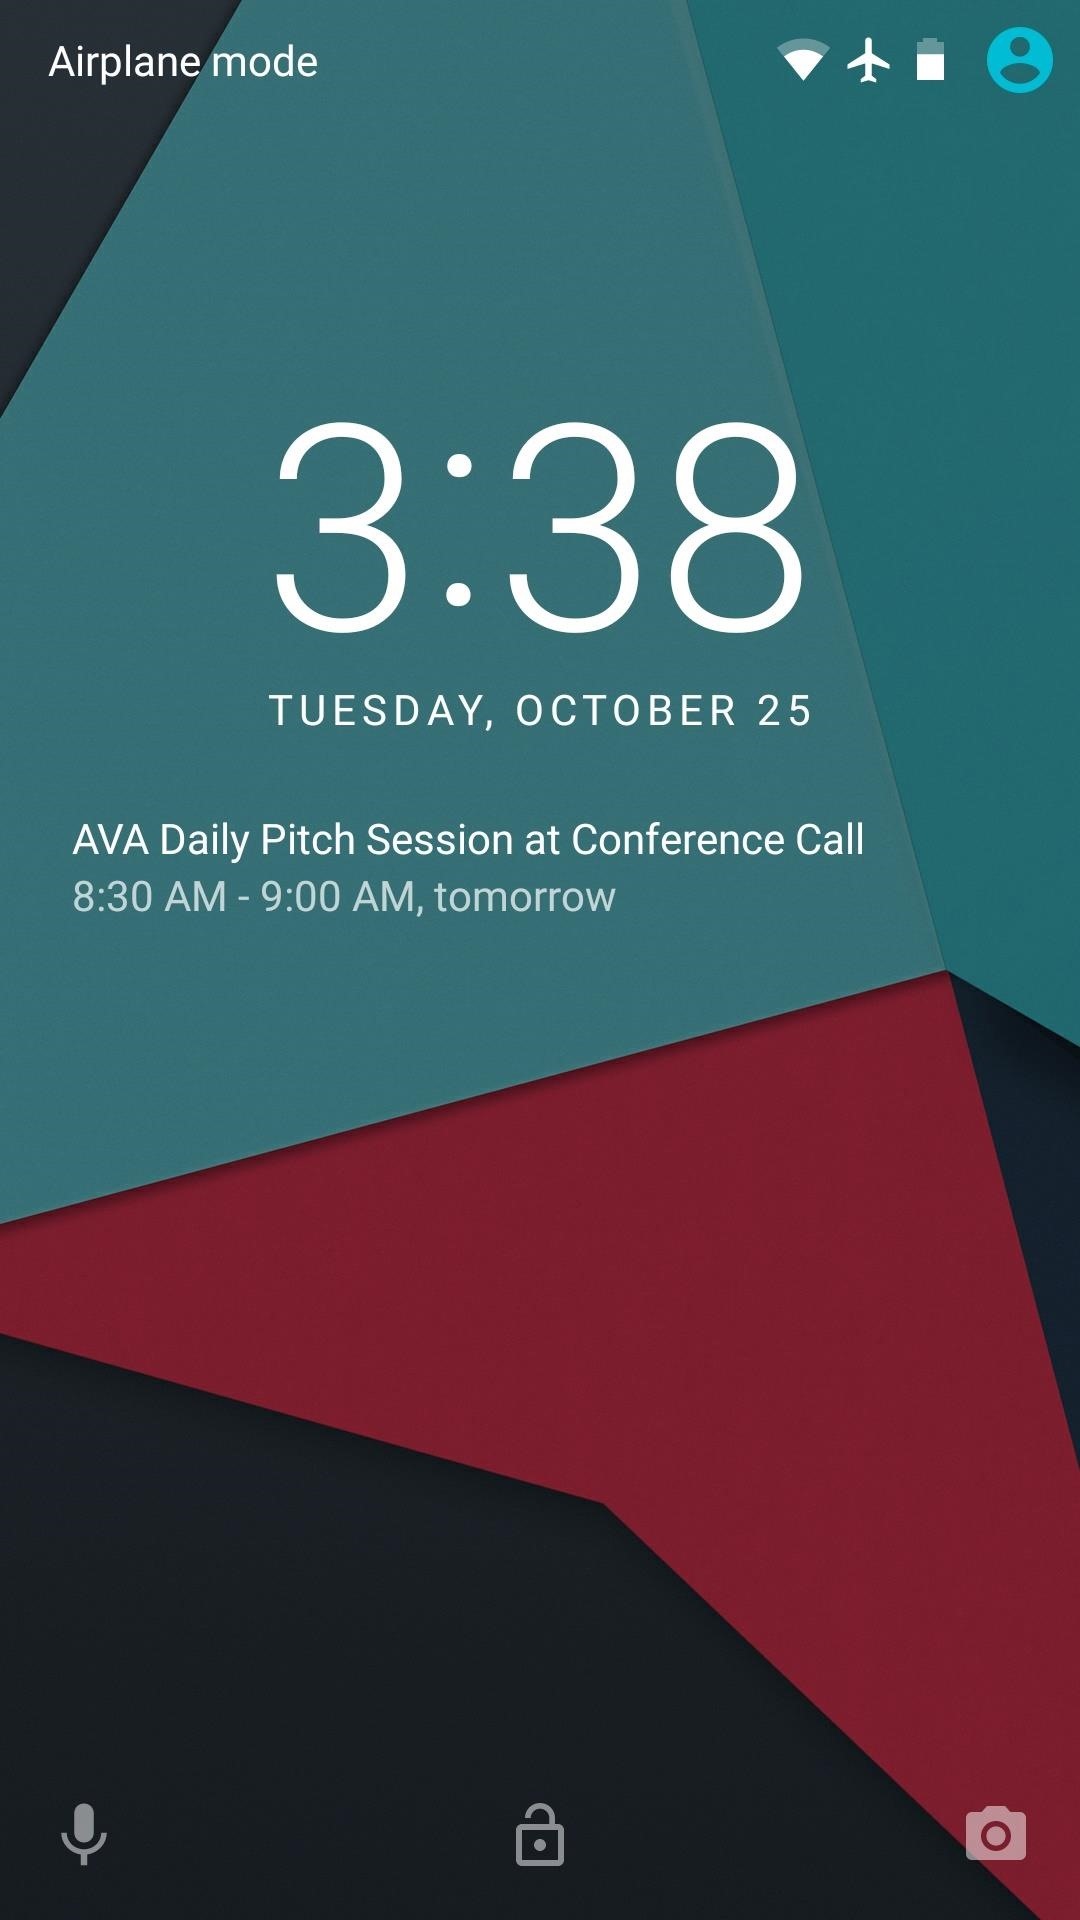 How to Get the iPhone's Calendar View on Your Android Lock Screen